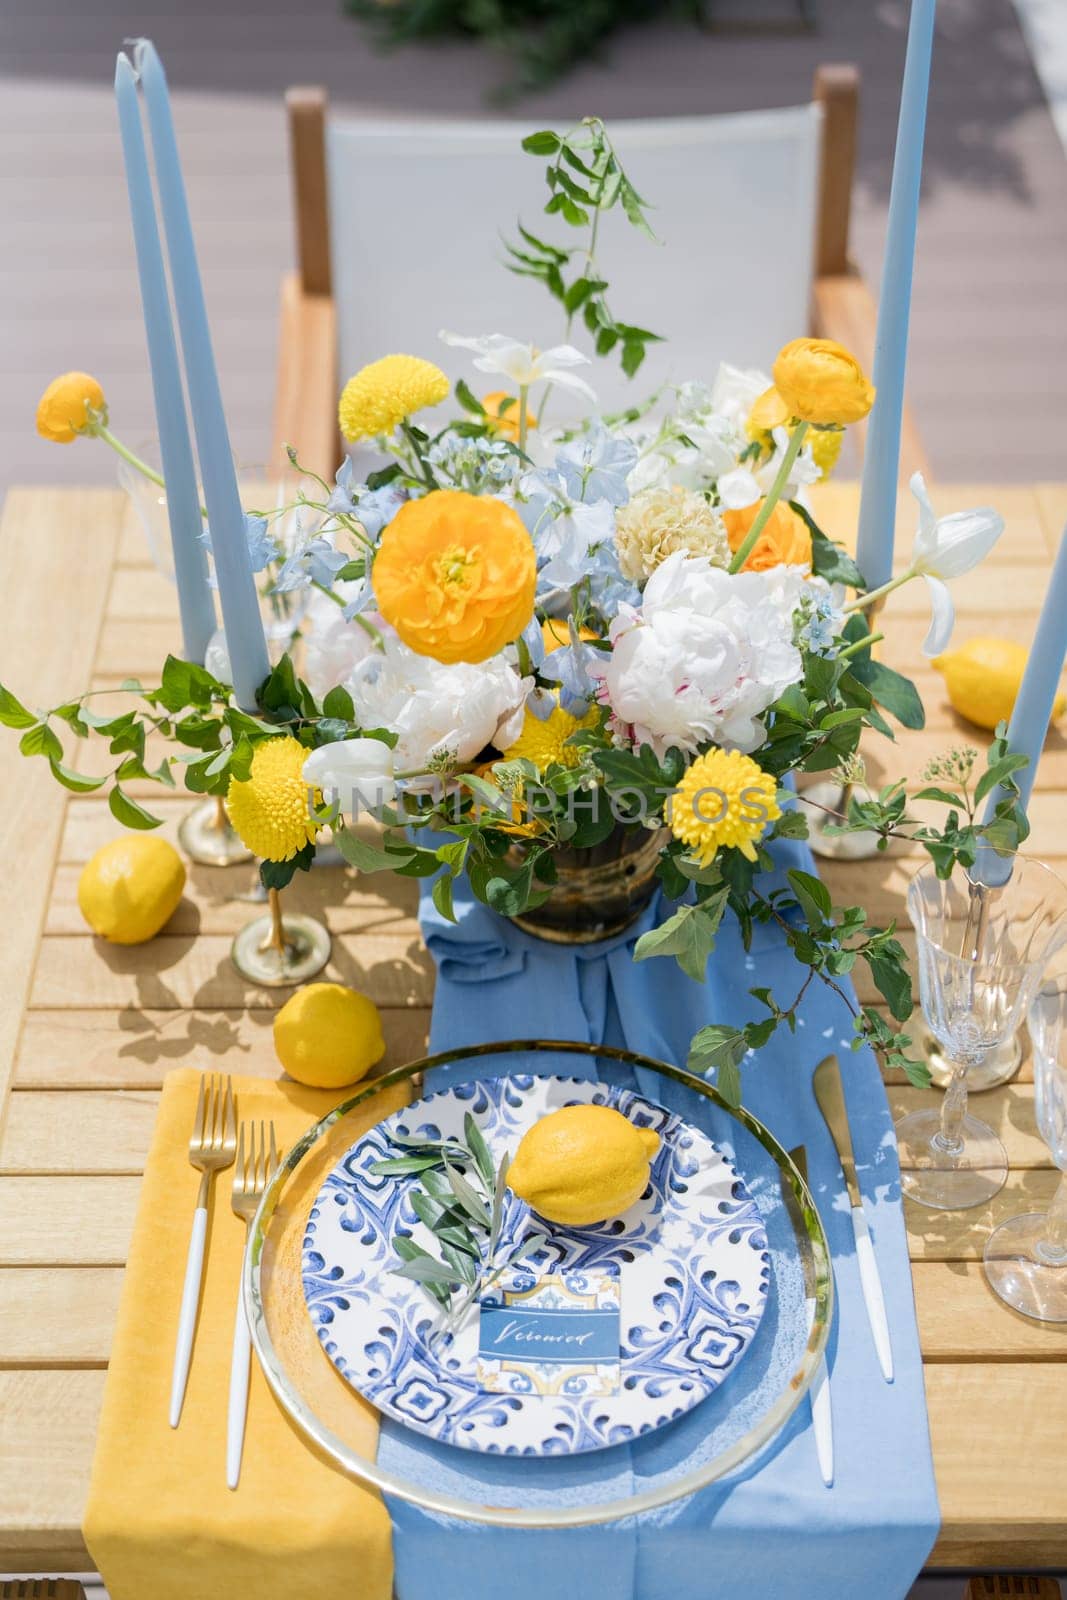 Name card lies next to an olive branch and a lemon on a plate on a set table near a colorful bouquet of flowers. High quality photo